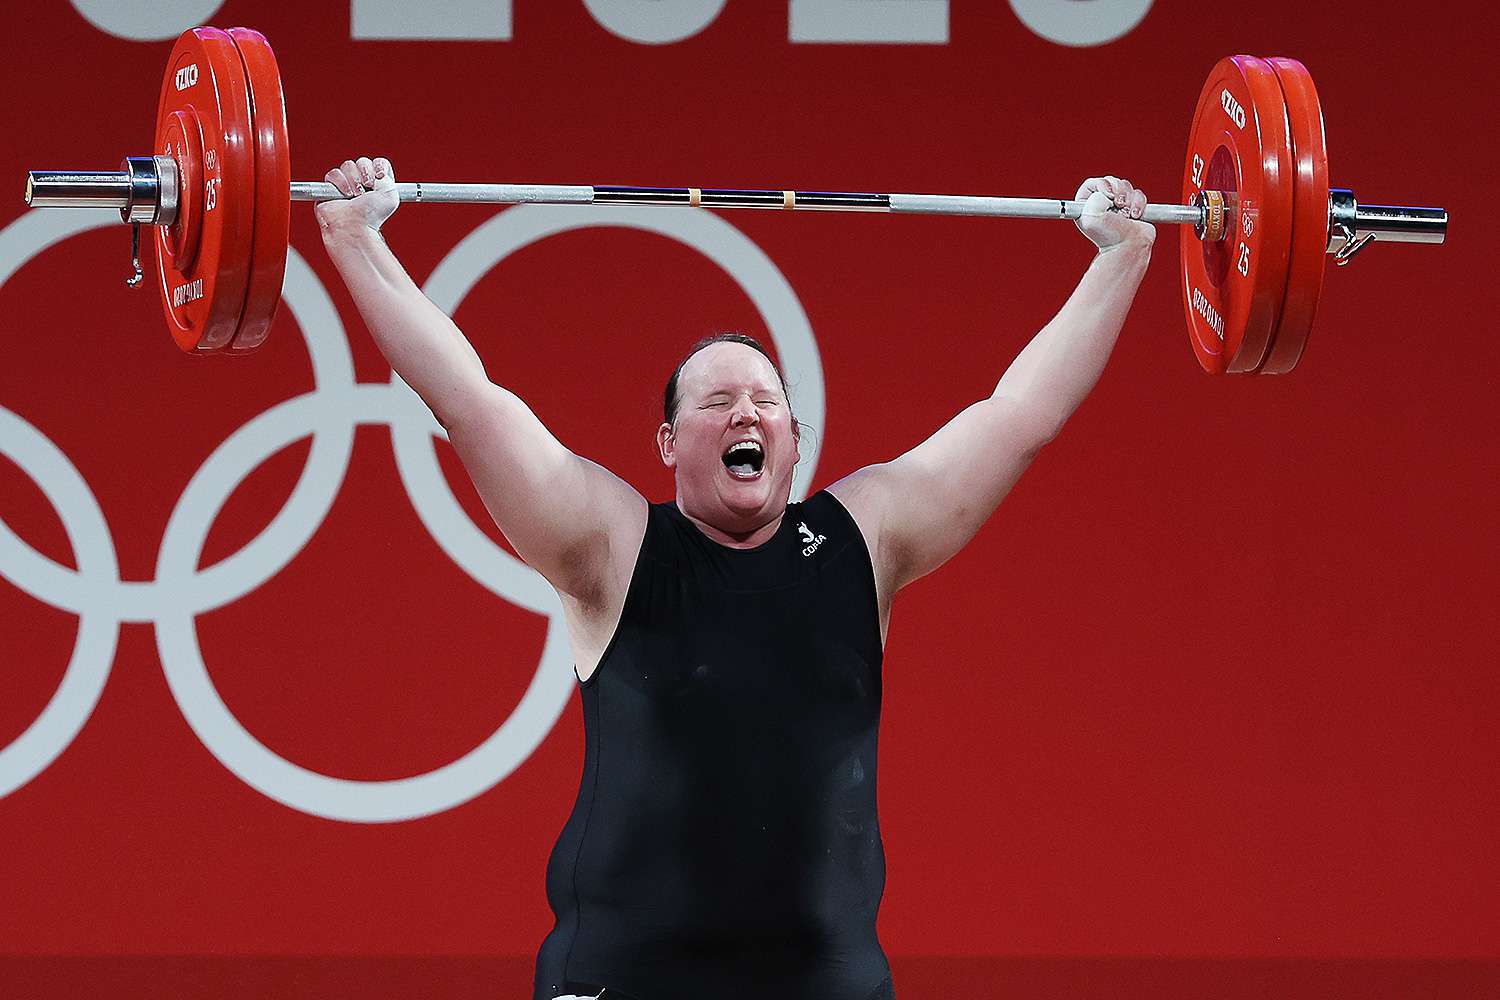 Transgender Weightlifter Laurel Hubbard Makes History at Tokyo Olympics  Despite an Early Exit | PEOPLE.com